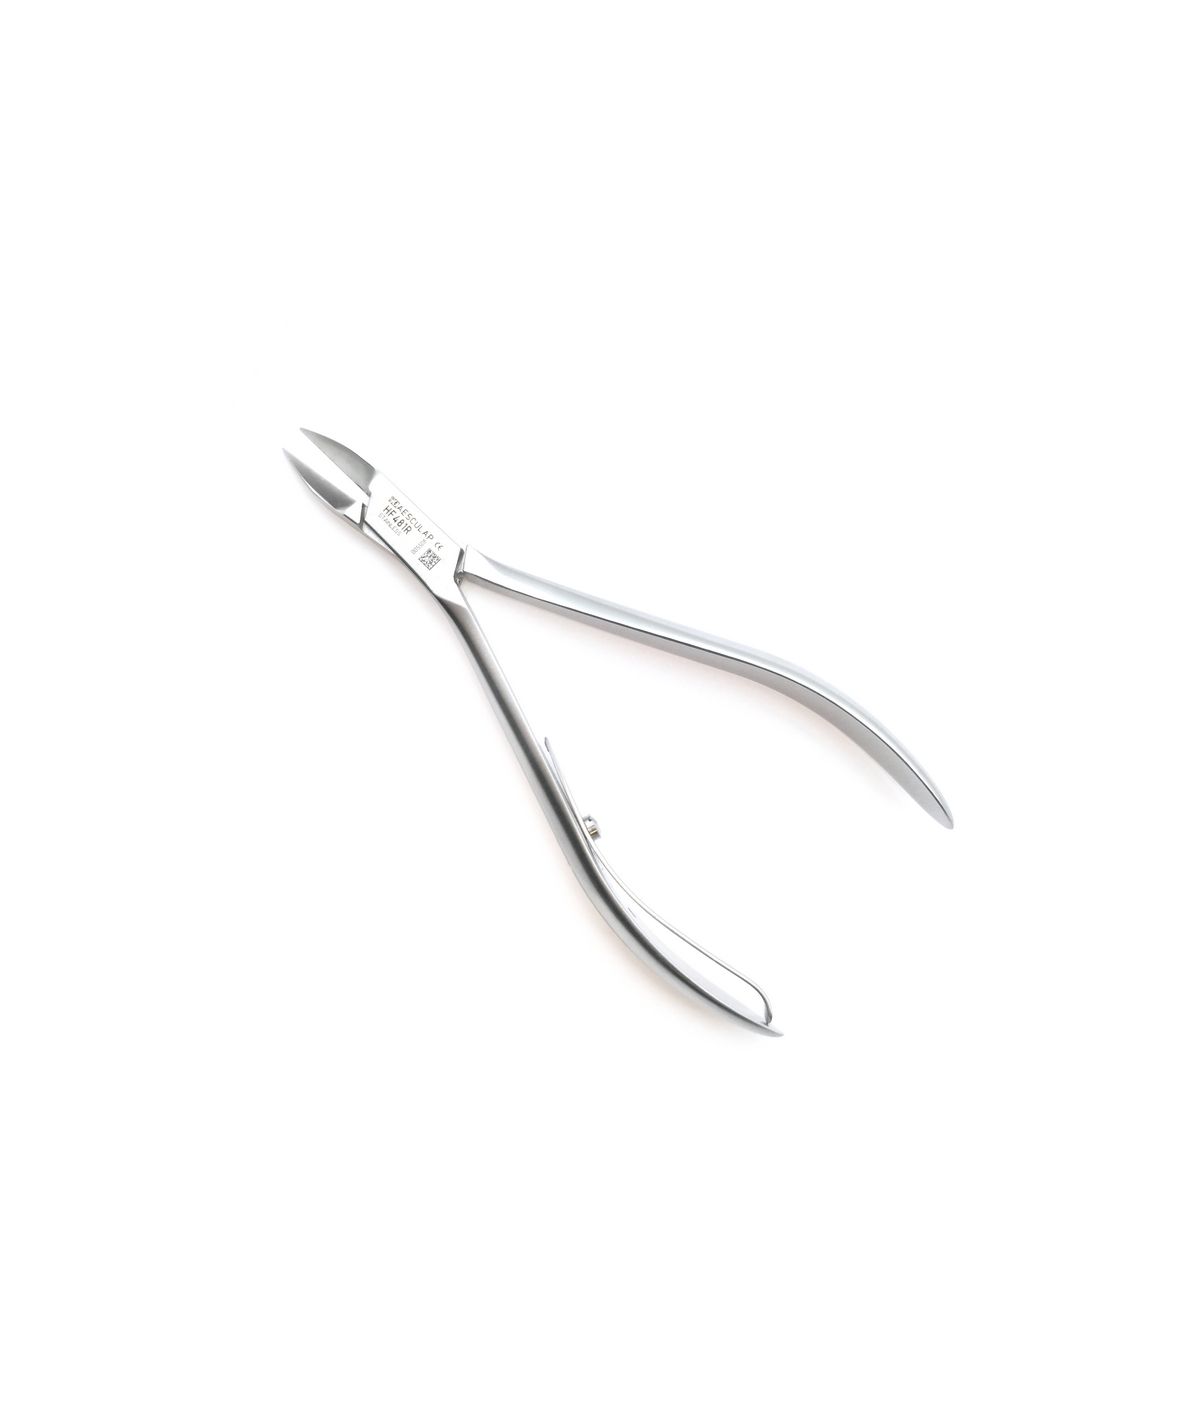 Pince à ongles incarnés inox- Mors fin - Taille 11.5 cm - Aesculap 481